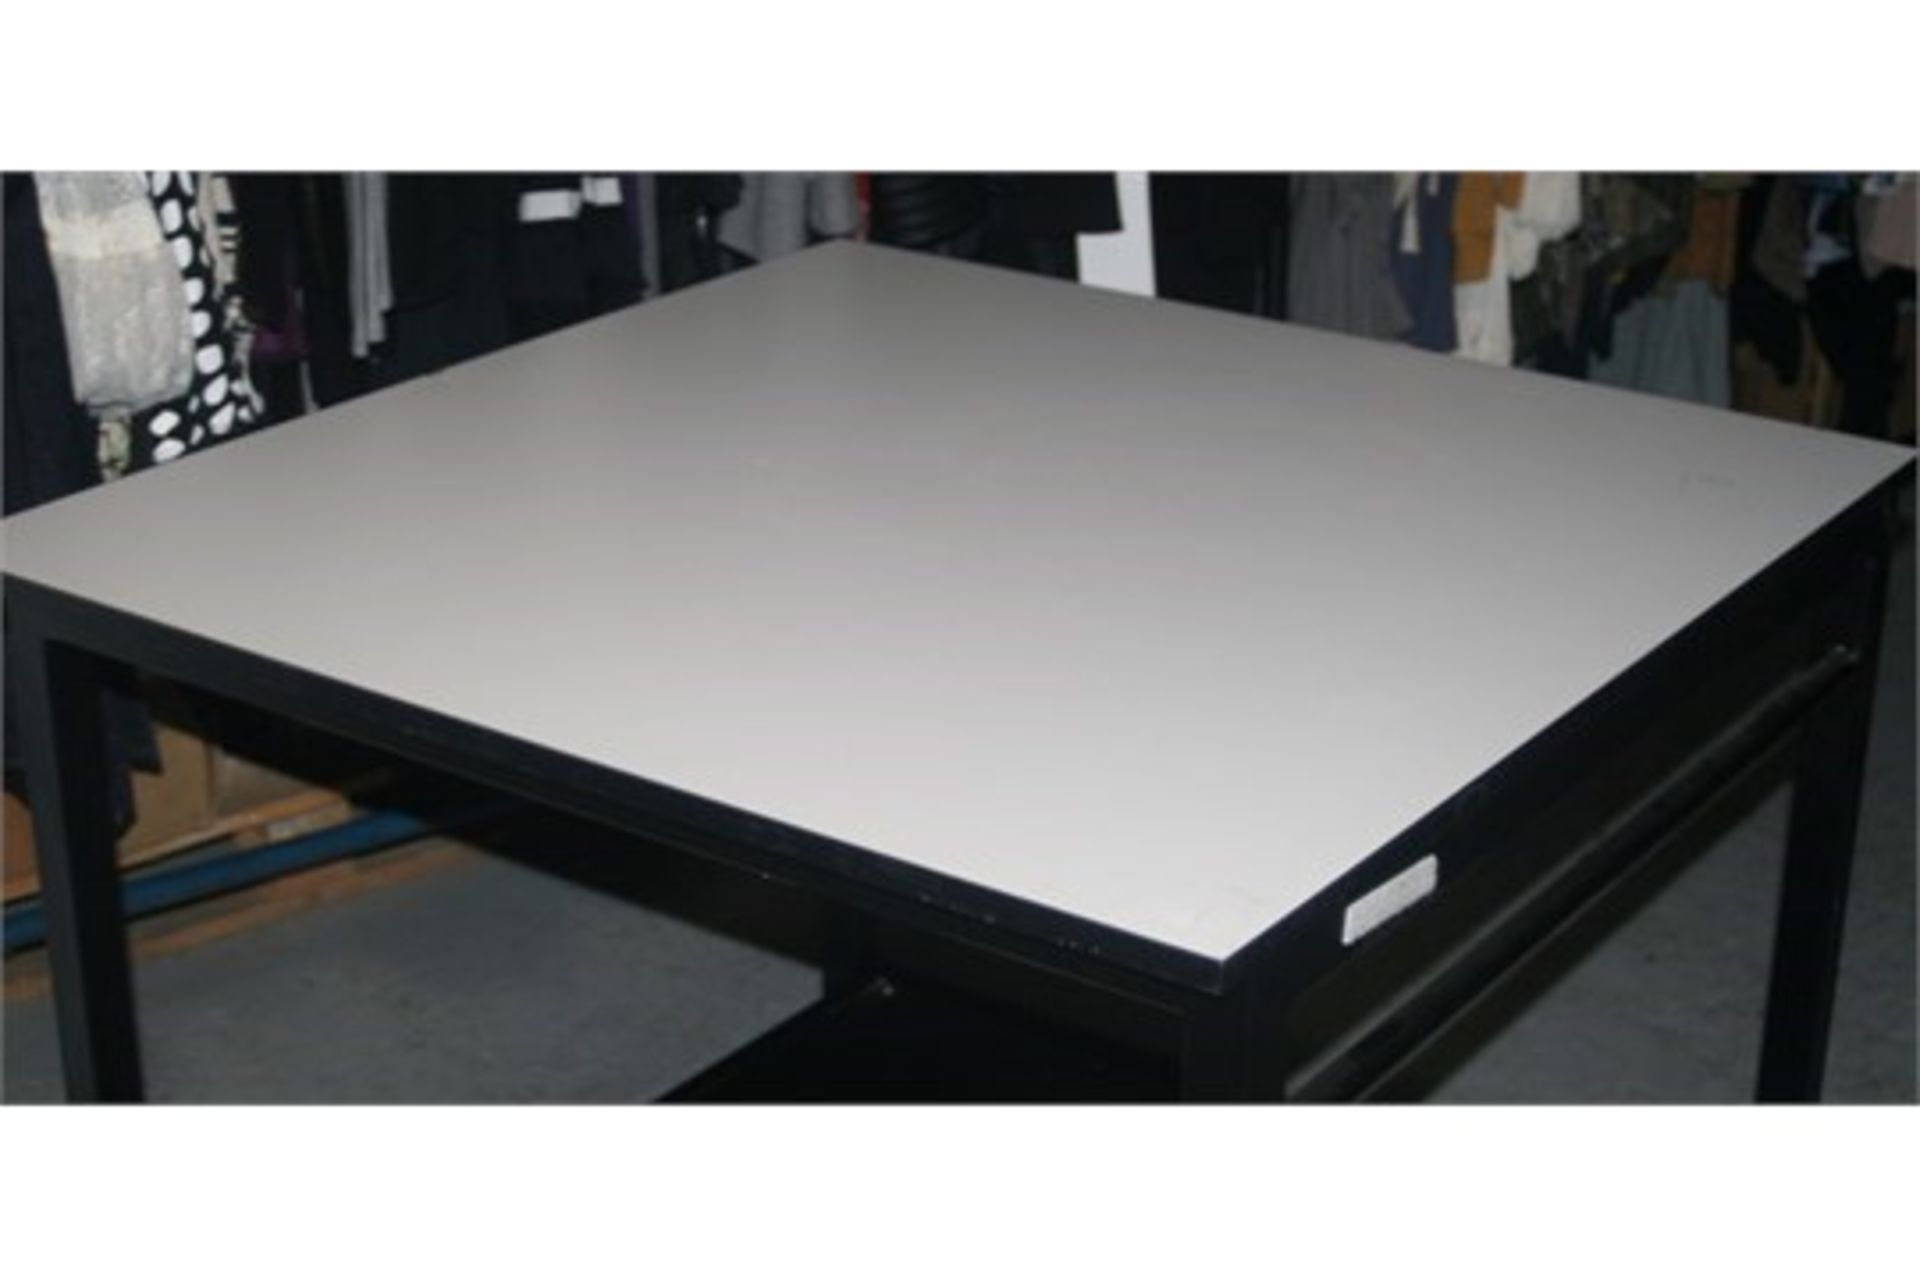 1 x Mobile Work Table - Large Size With Undershelf and Heavy Duty Castor Wheels - Strong Build - Image 8 of 8